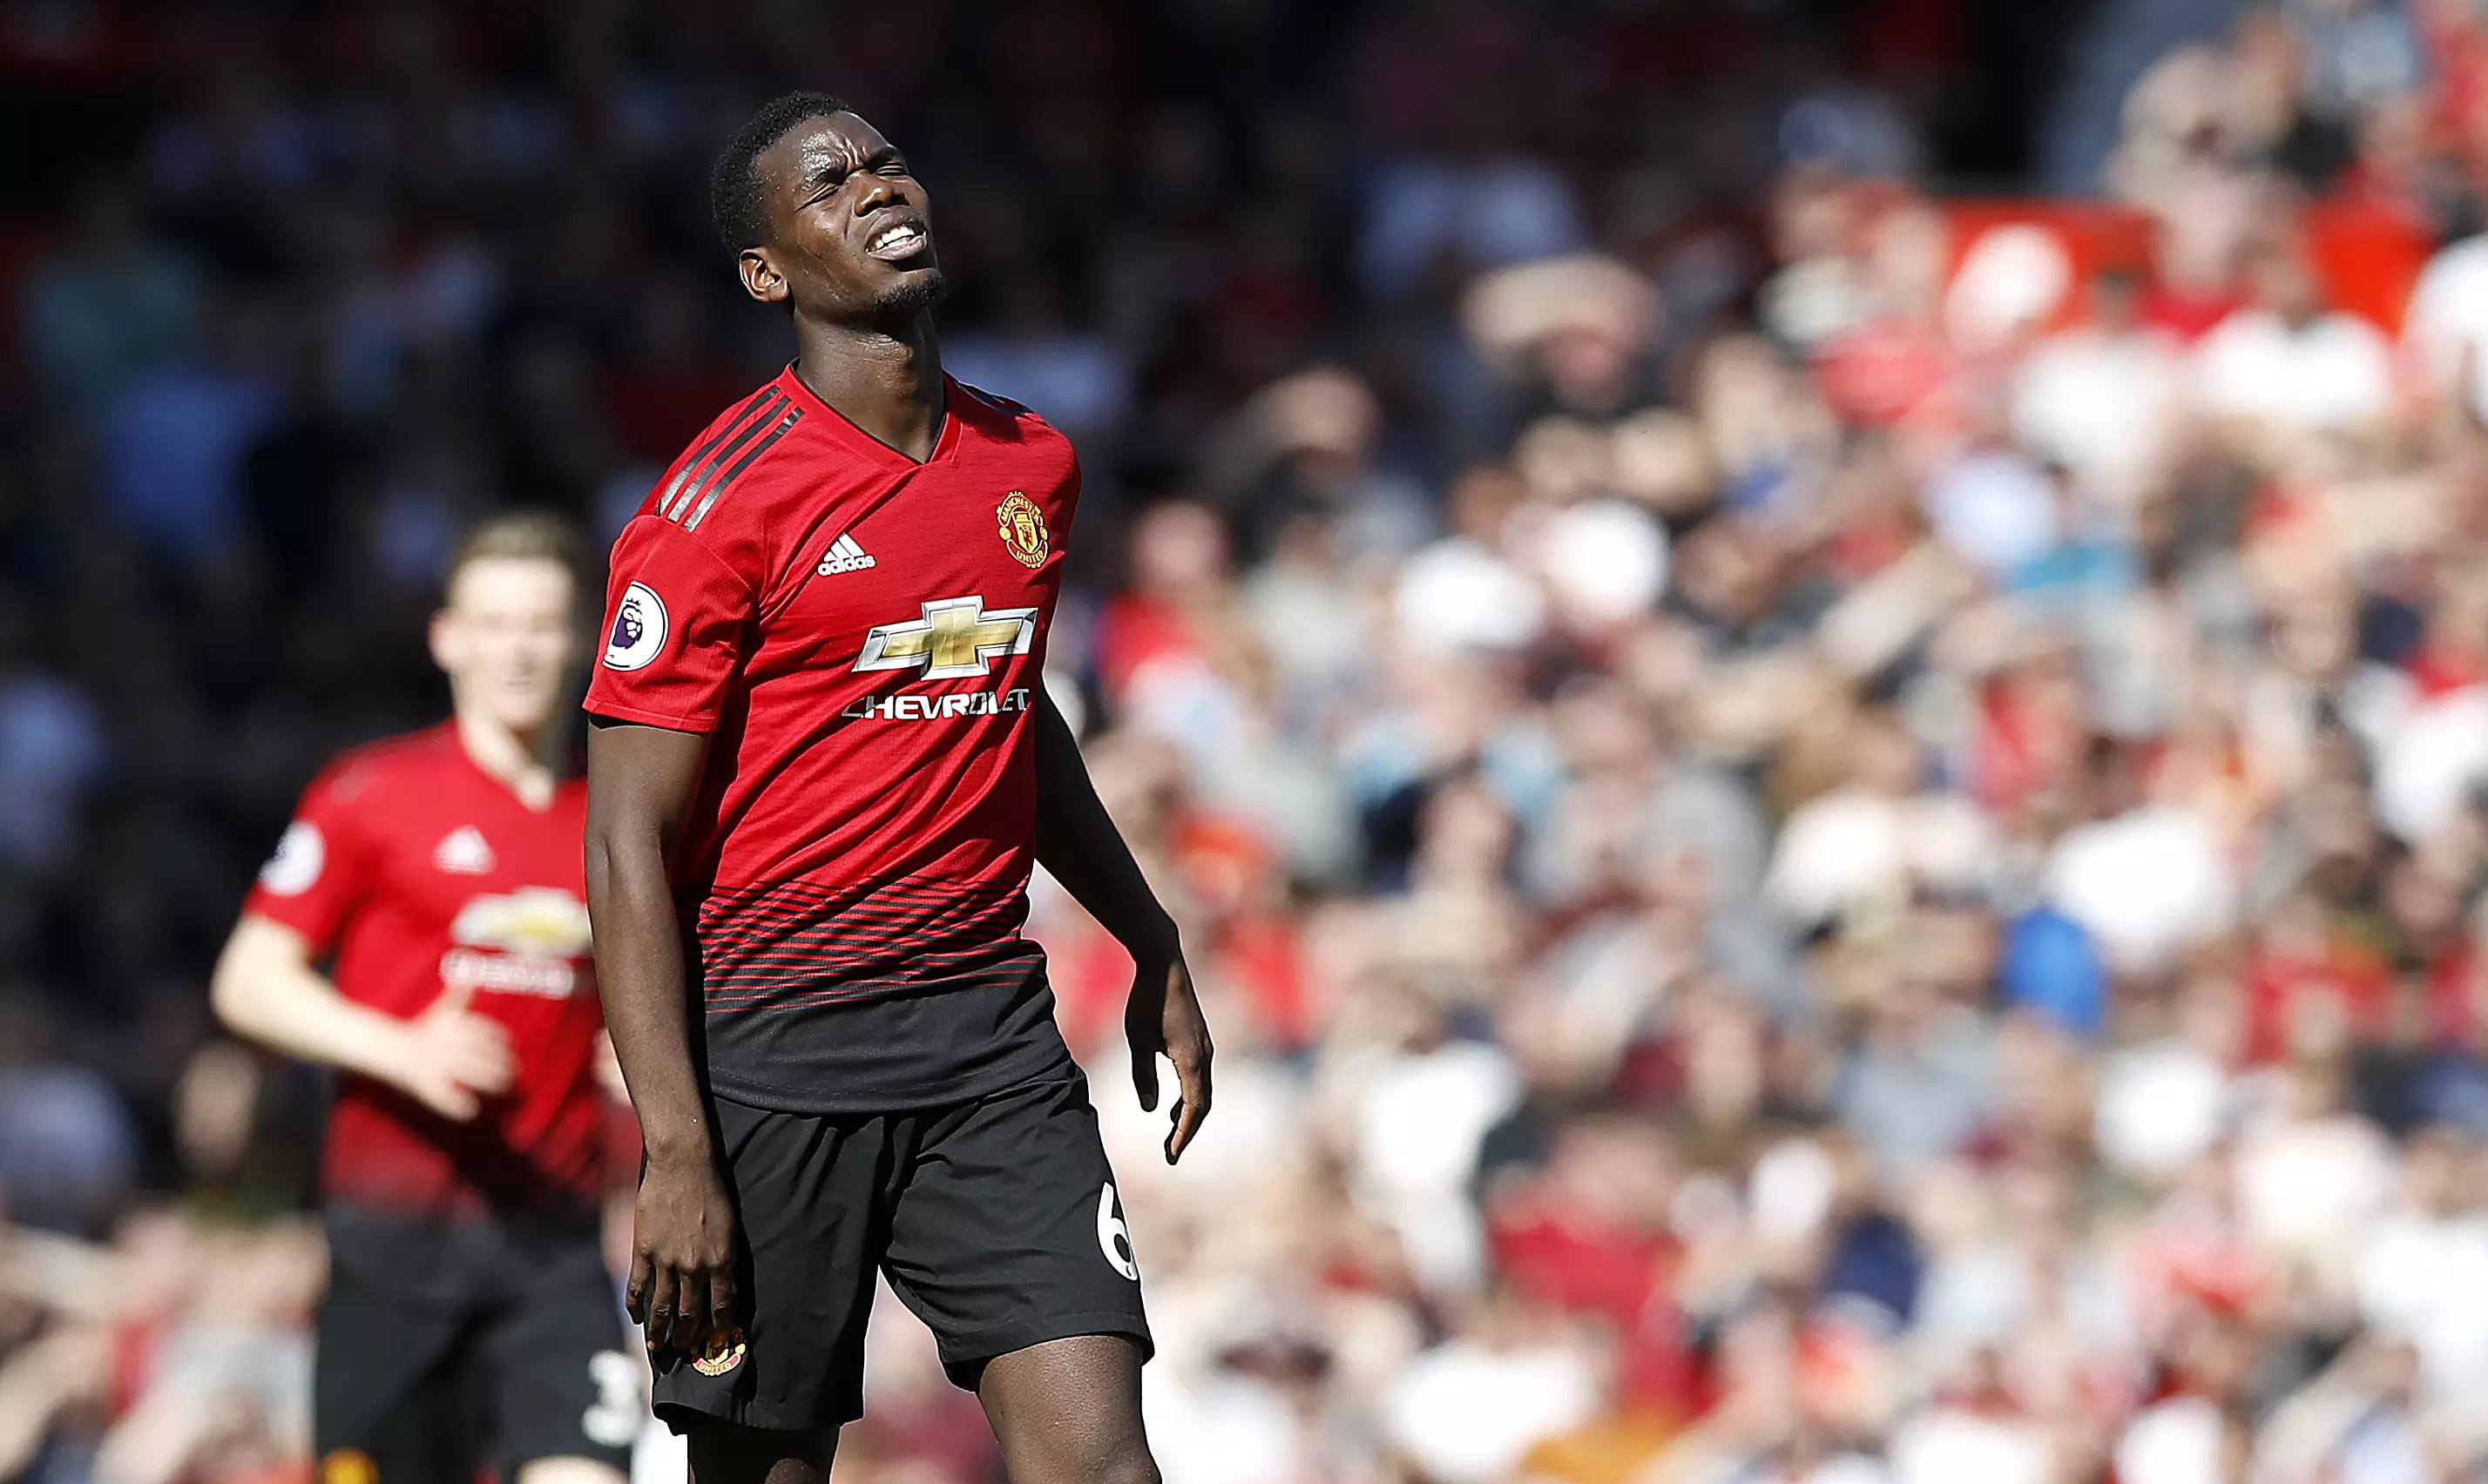 Angry fans shouted abuse at Paul Pogba following today's match.